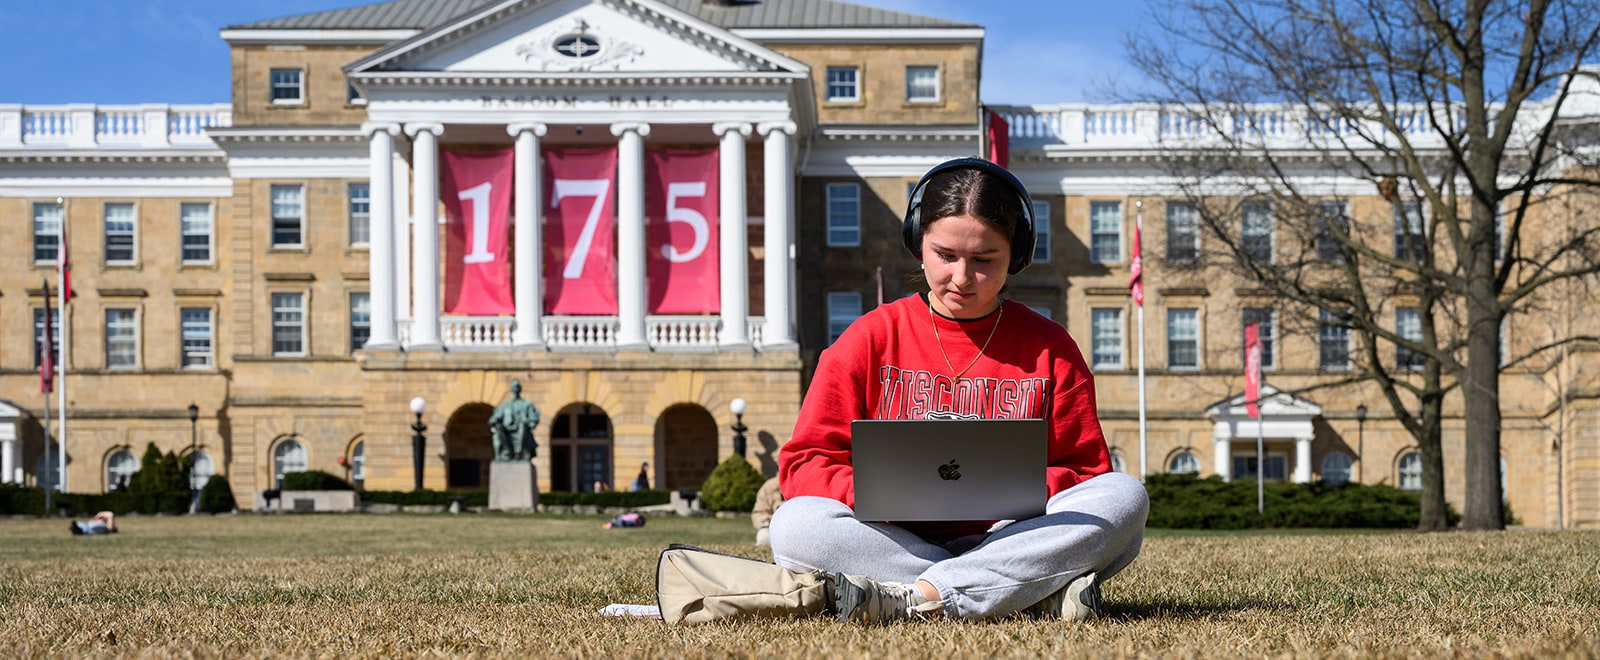 A student studies on Bascom Hill on an early spring day with Bascom Hall, adorned with 175 banners, behind her.